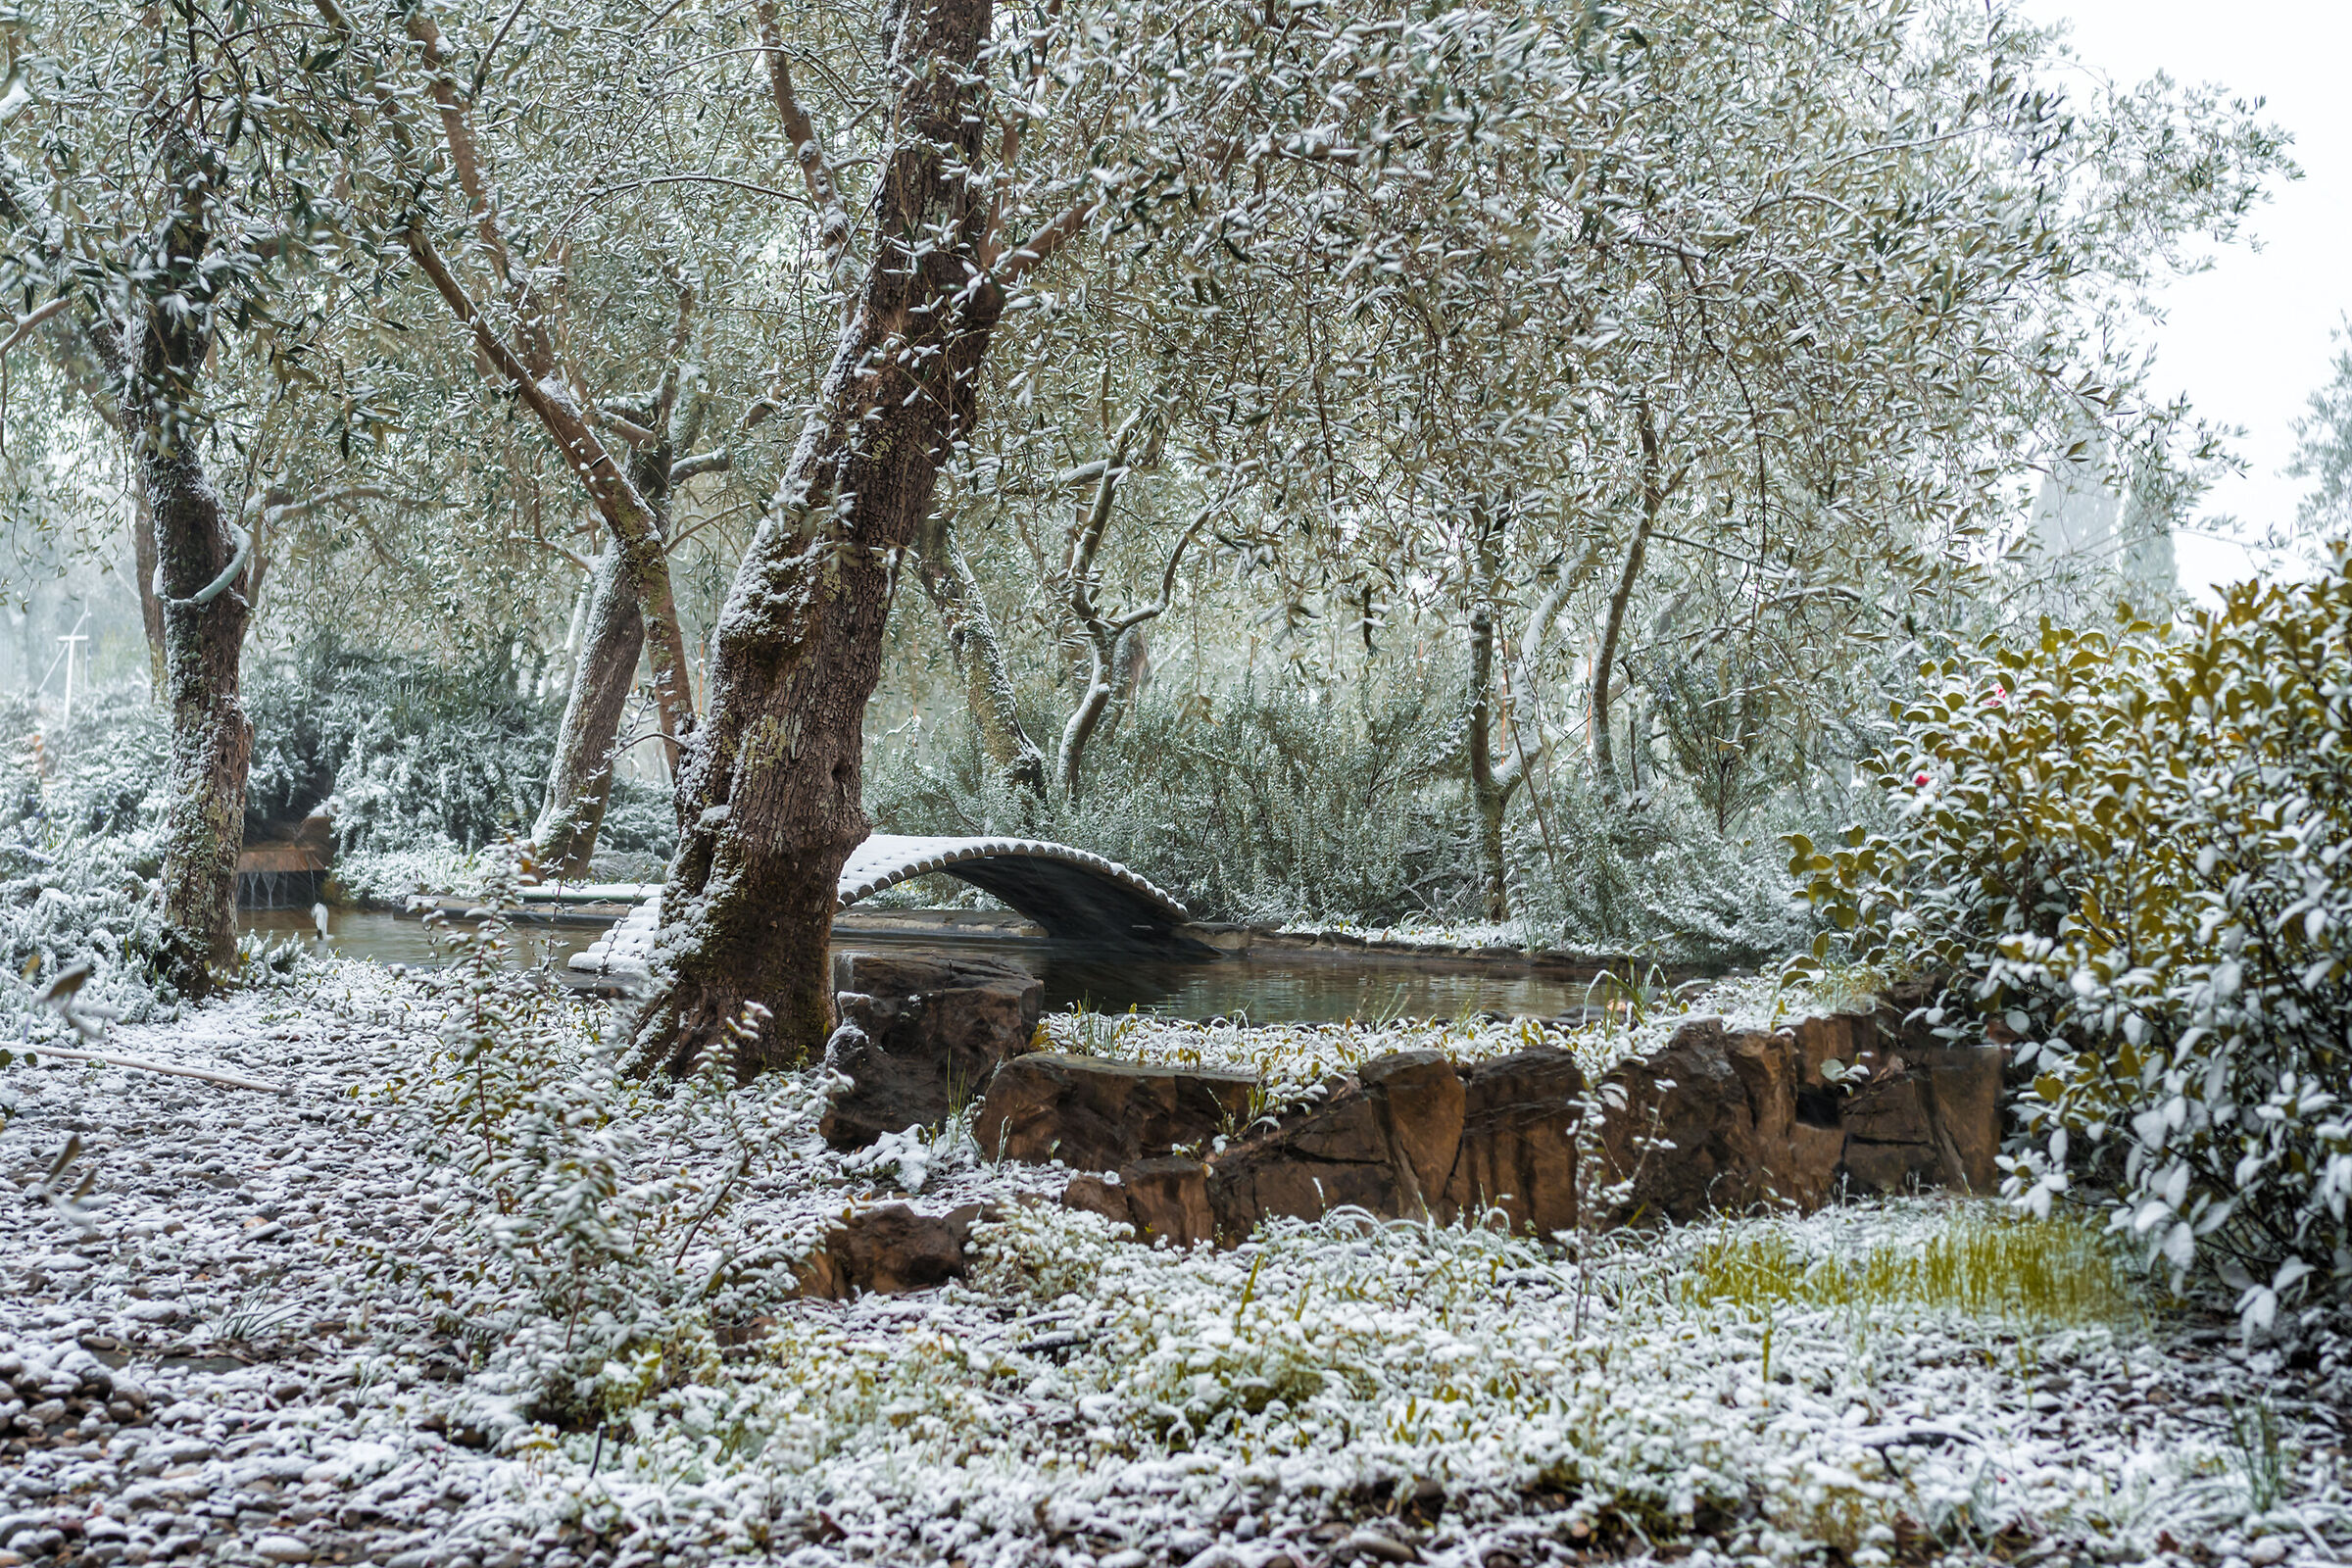 Snow among the olive trees...